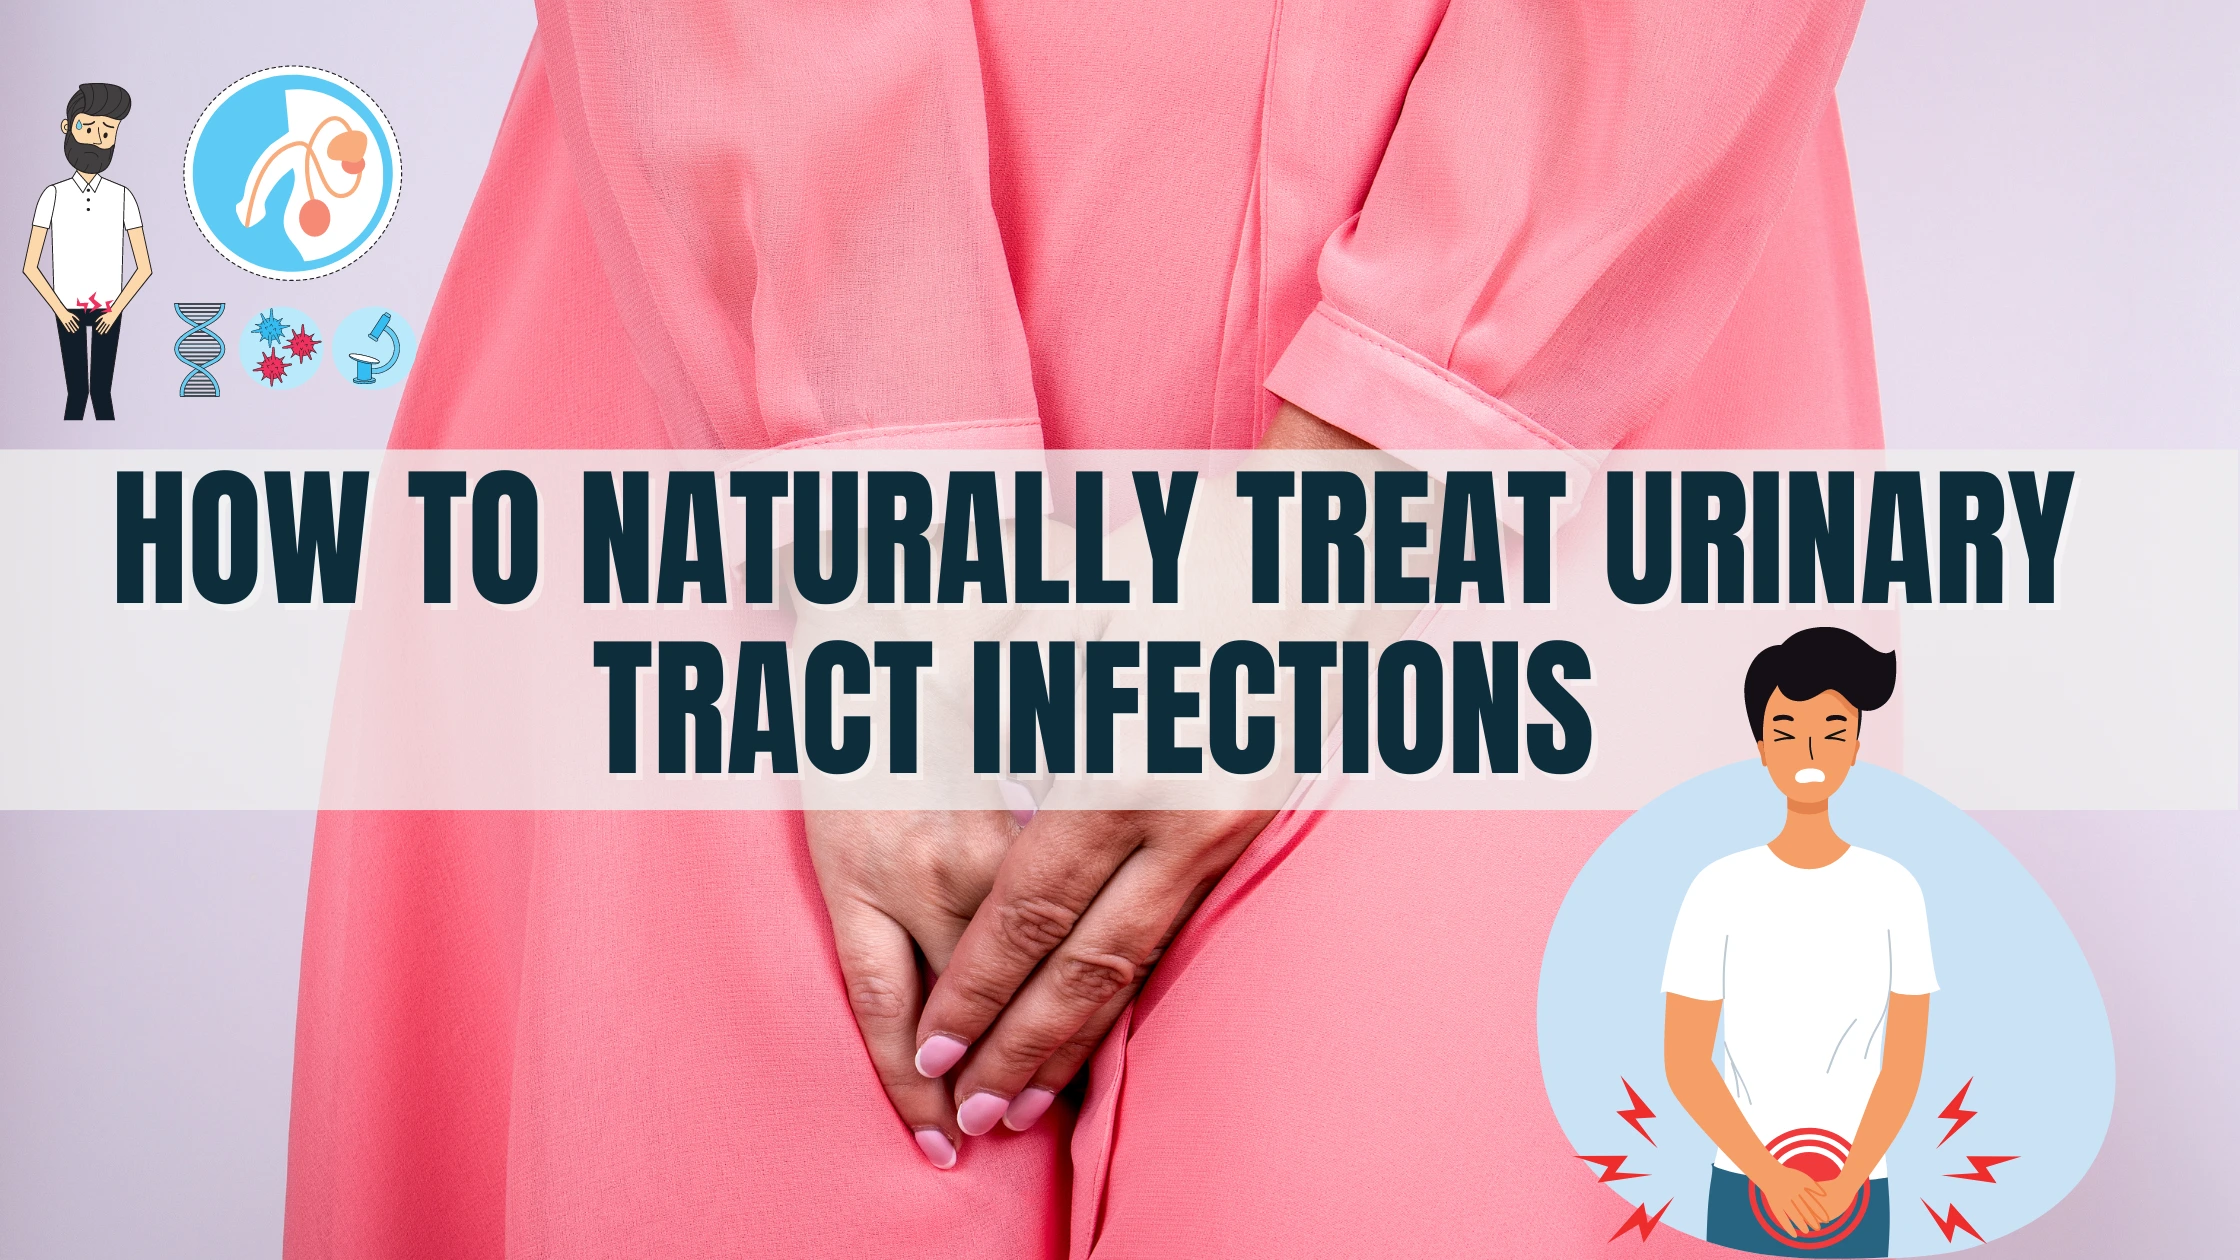 Naturally Treat Urinary Tract Infections